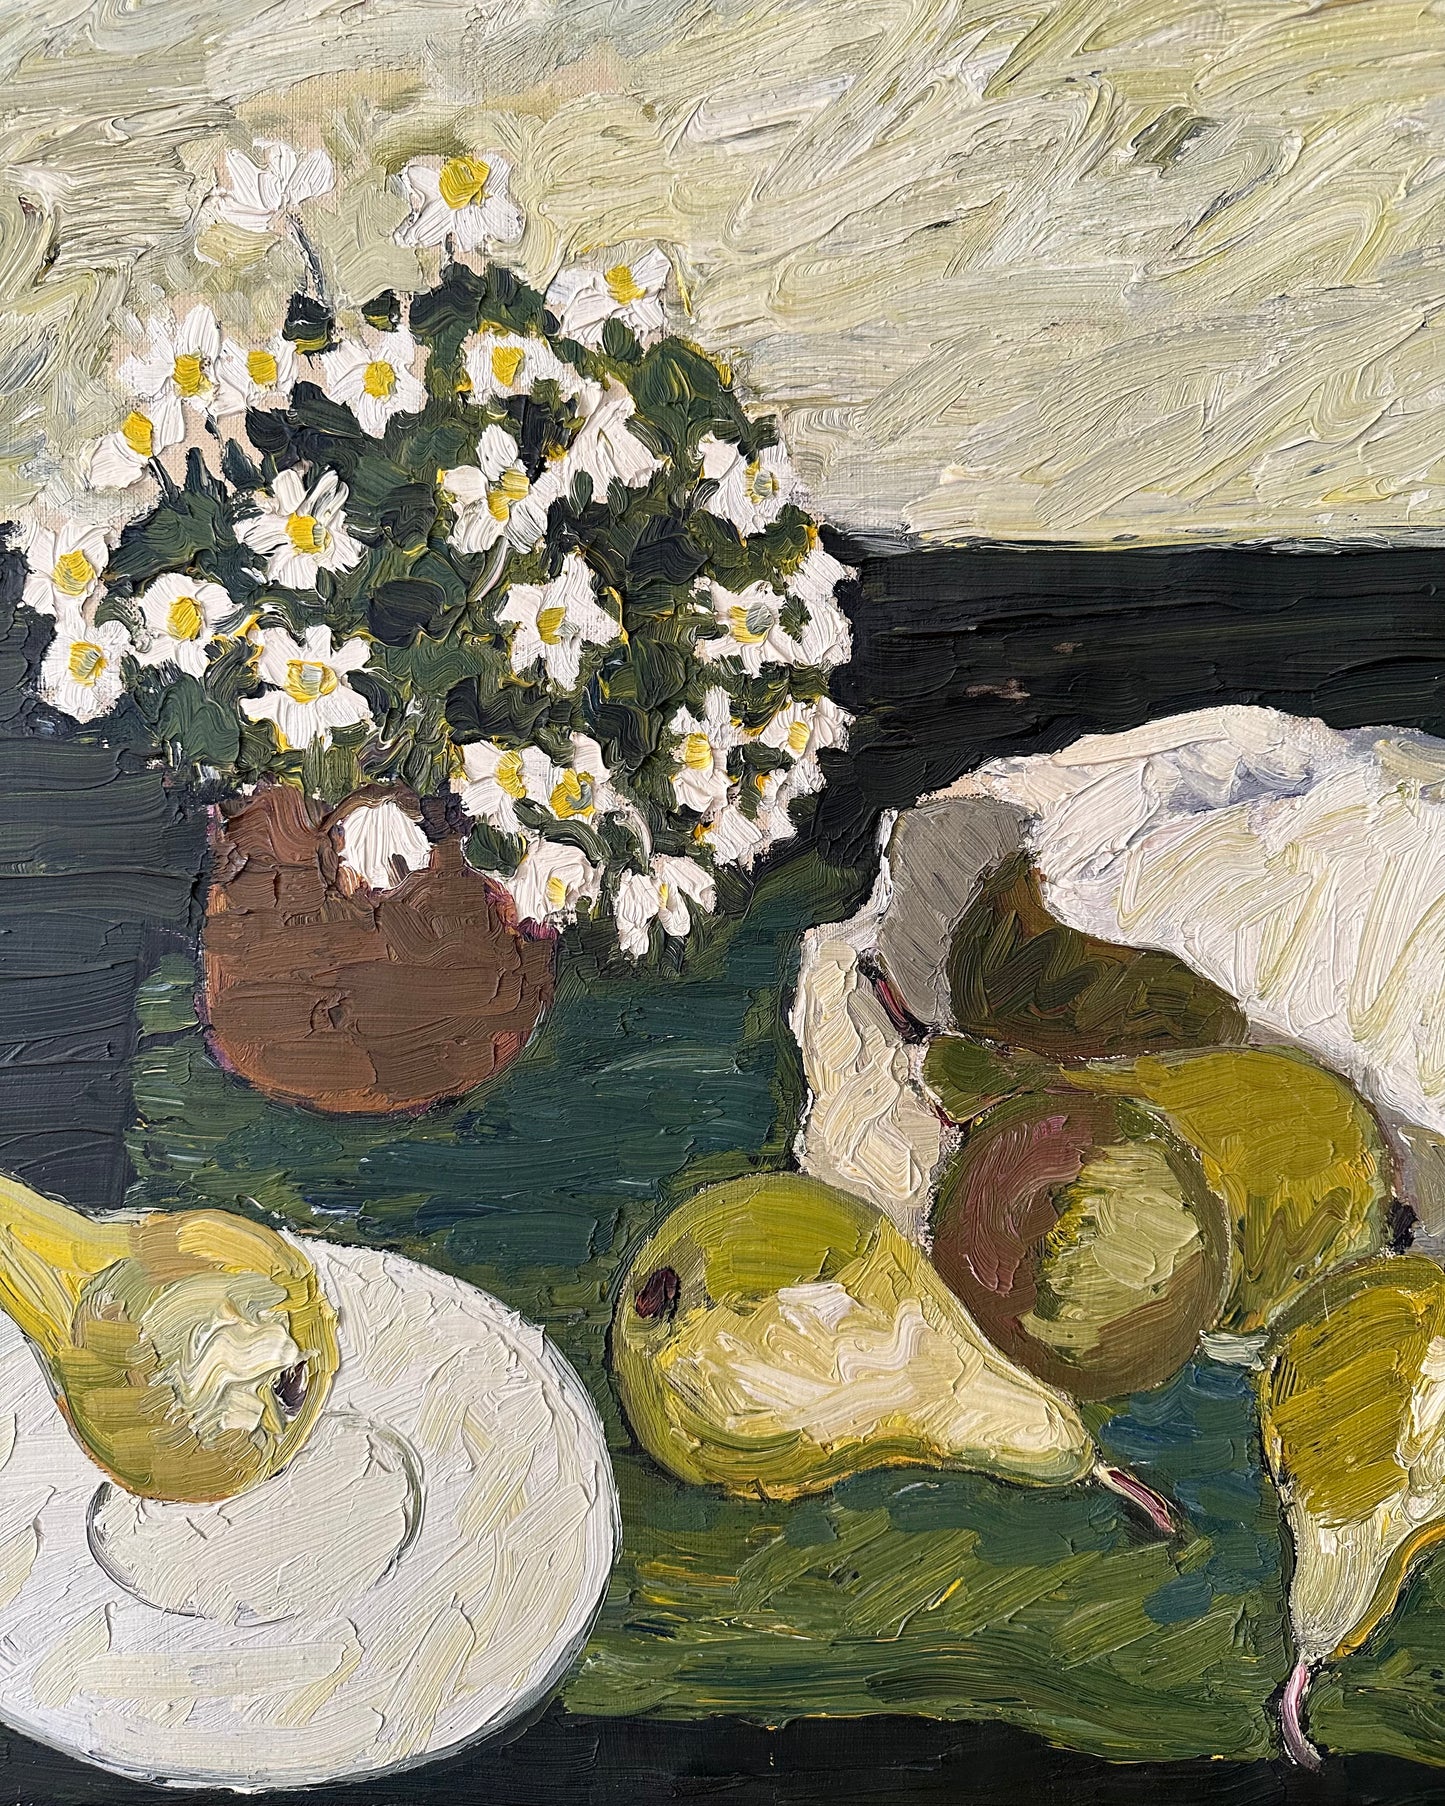 Wood Anemones and Pears